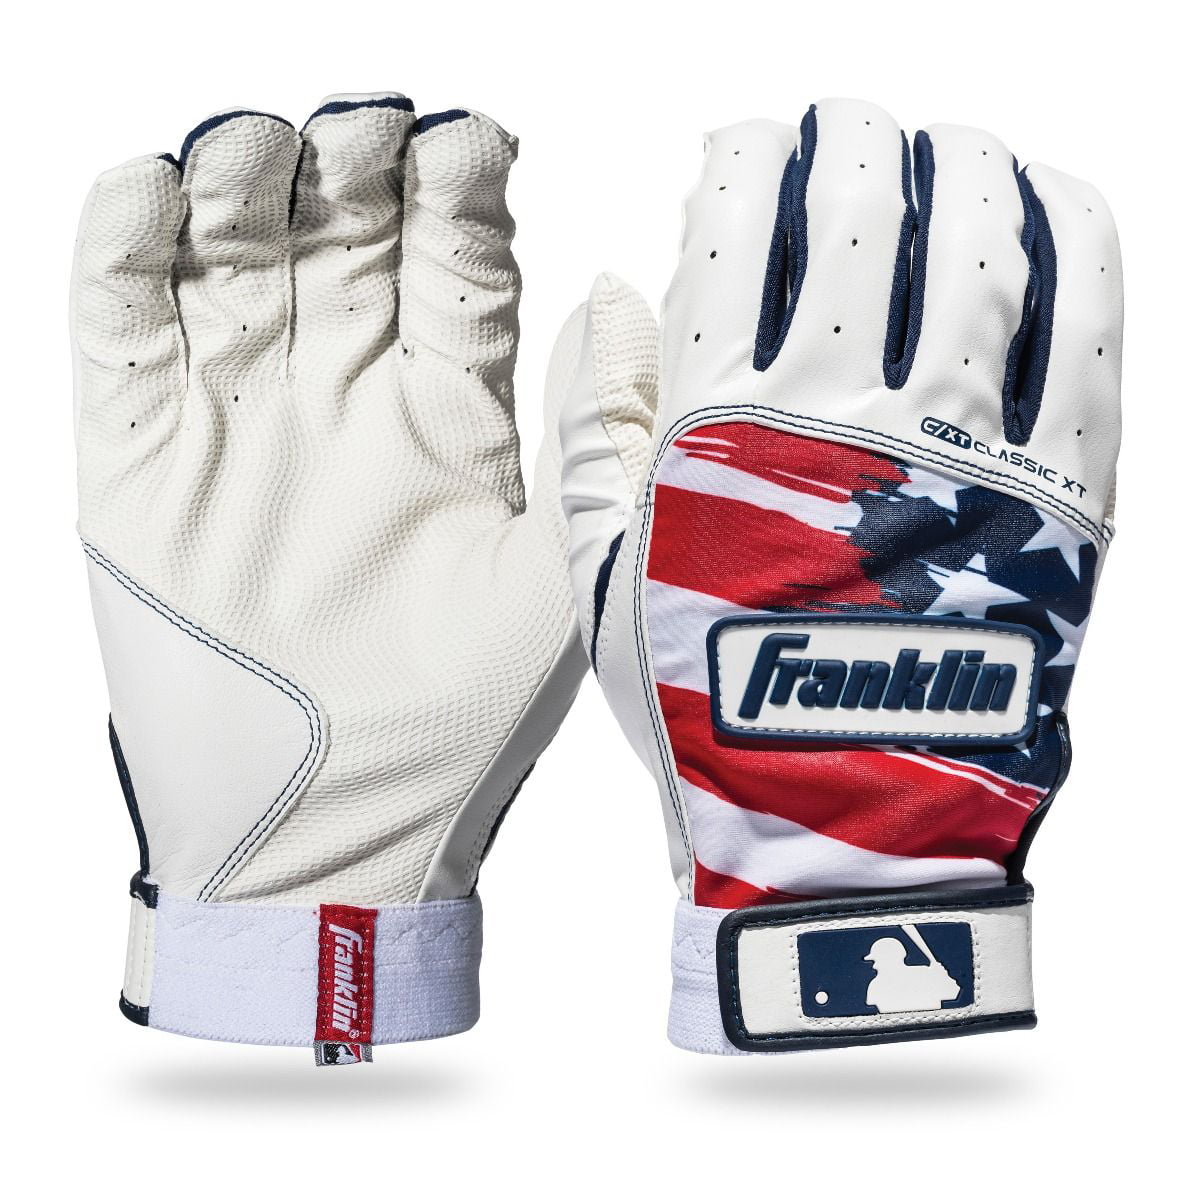 Pair of Franklin Fastpitch Freeflex XT Batting Glove Size Small & Color Teal 